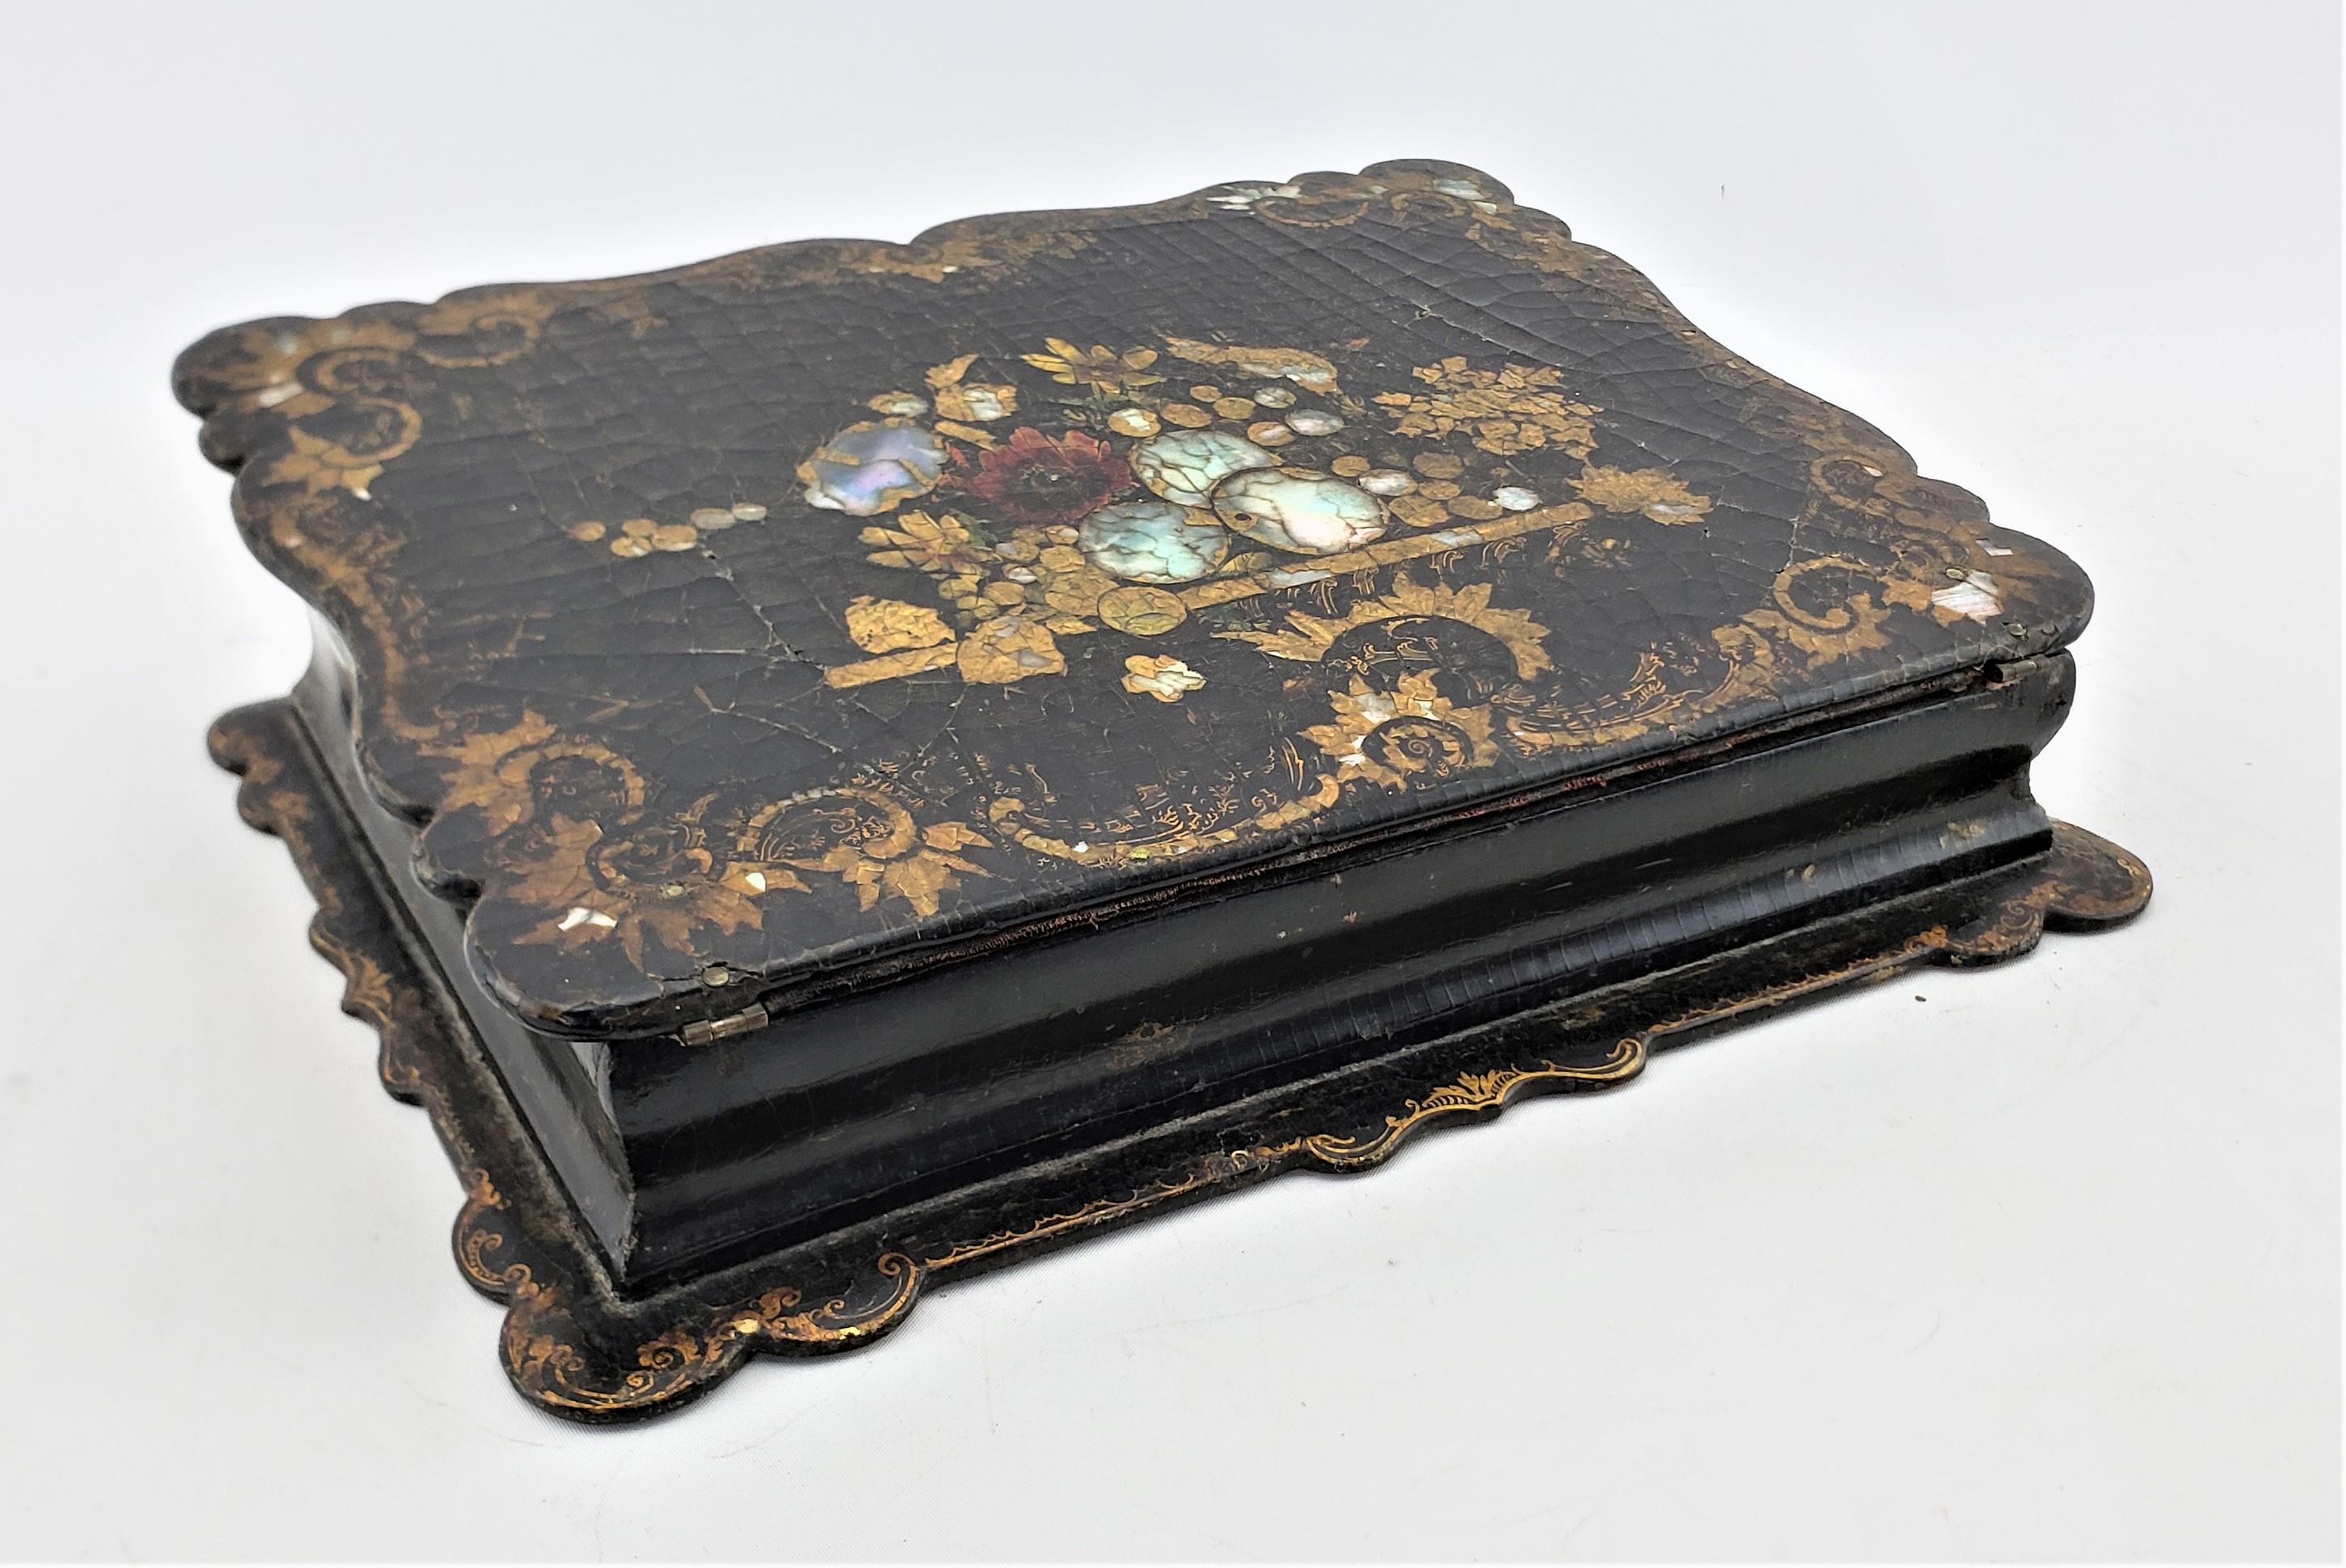 This antique writing box or lap desk was made by the highly renowned Jennens & Bettridge of England in approximately 1880 and done in the period Victorian style. The box is constructed of paper mache which has been treated with a lacquer finish or